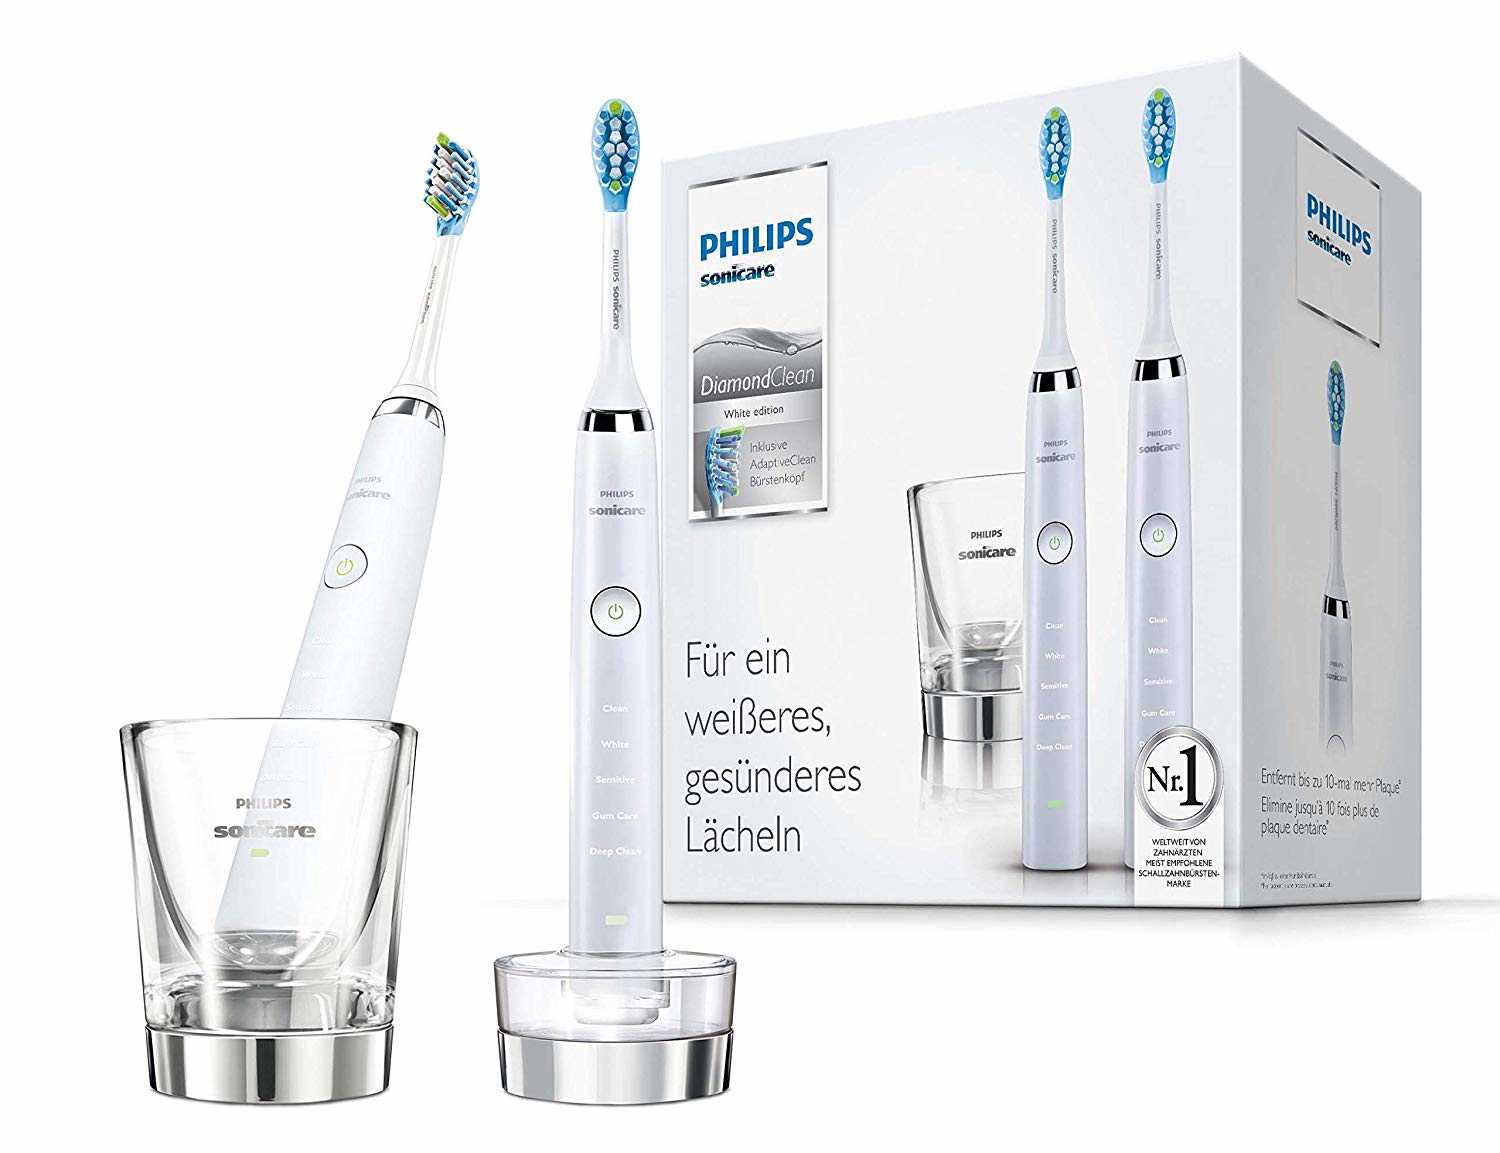 philips-sonicare-diamondclean-smart-9500-rechargeable-toothbrush-silver